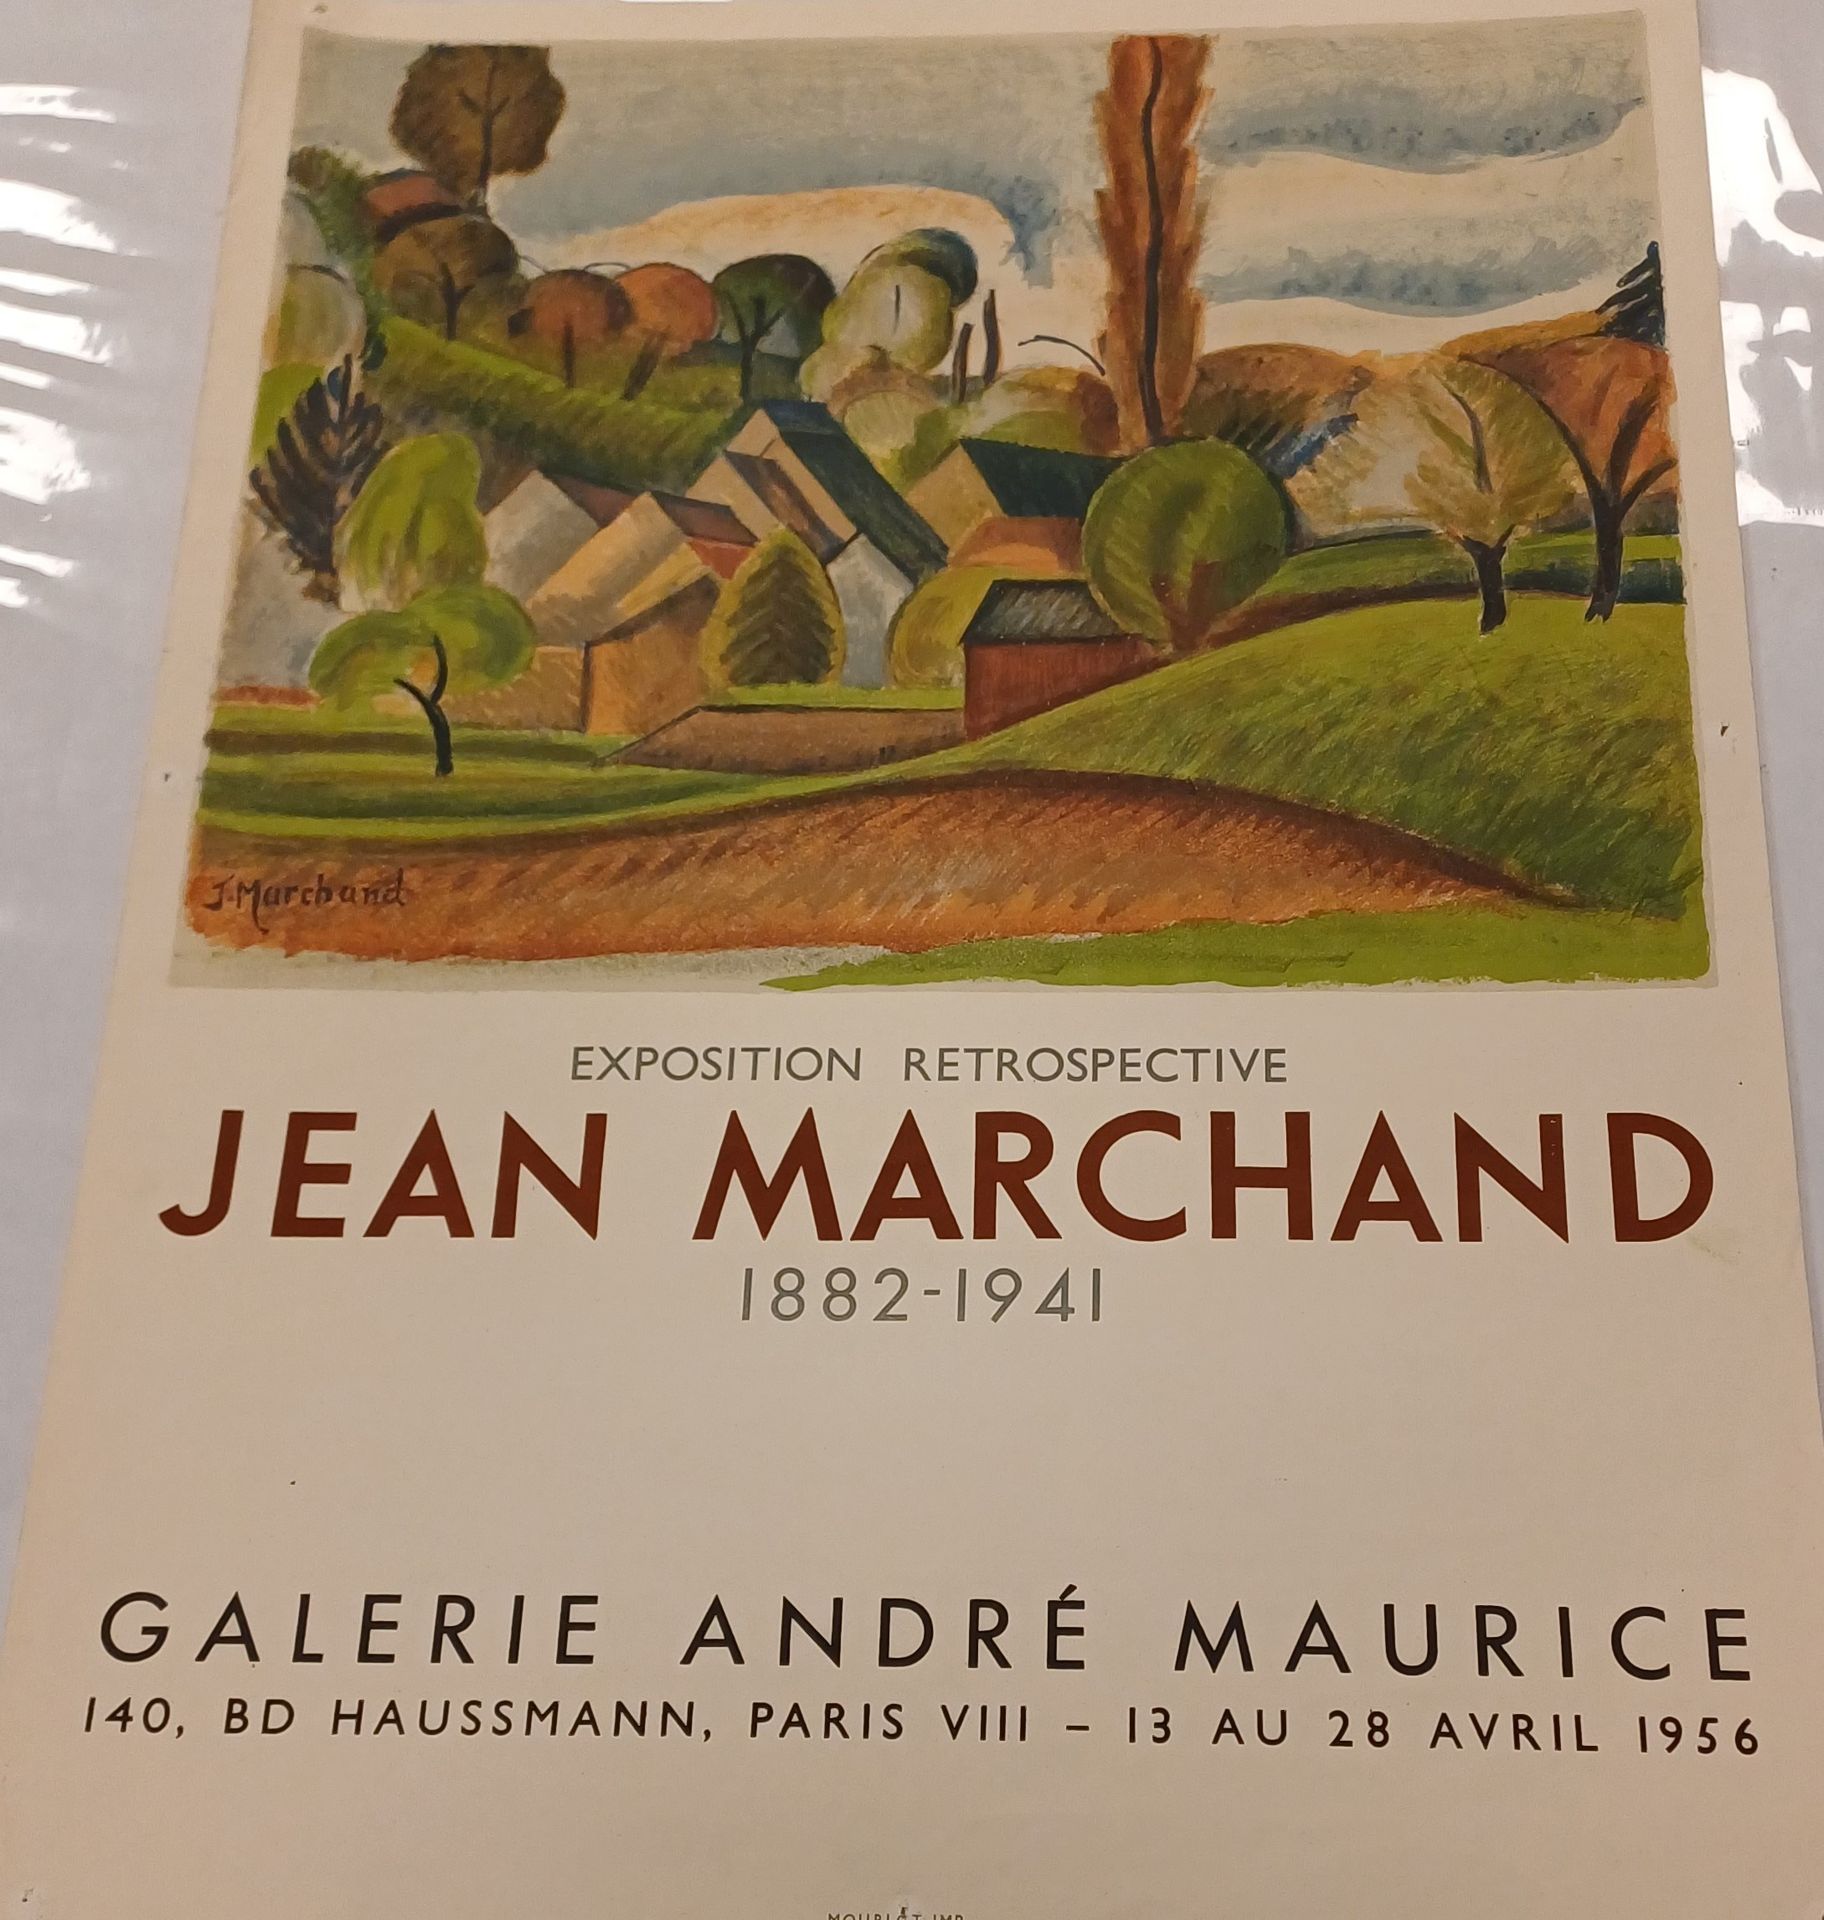 Jean Marchand Affiche Jean Marchand
Galerie André Maurice 1956
62,5 x 47,5 cm